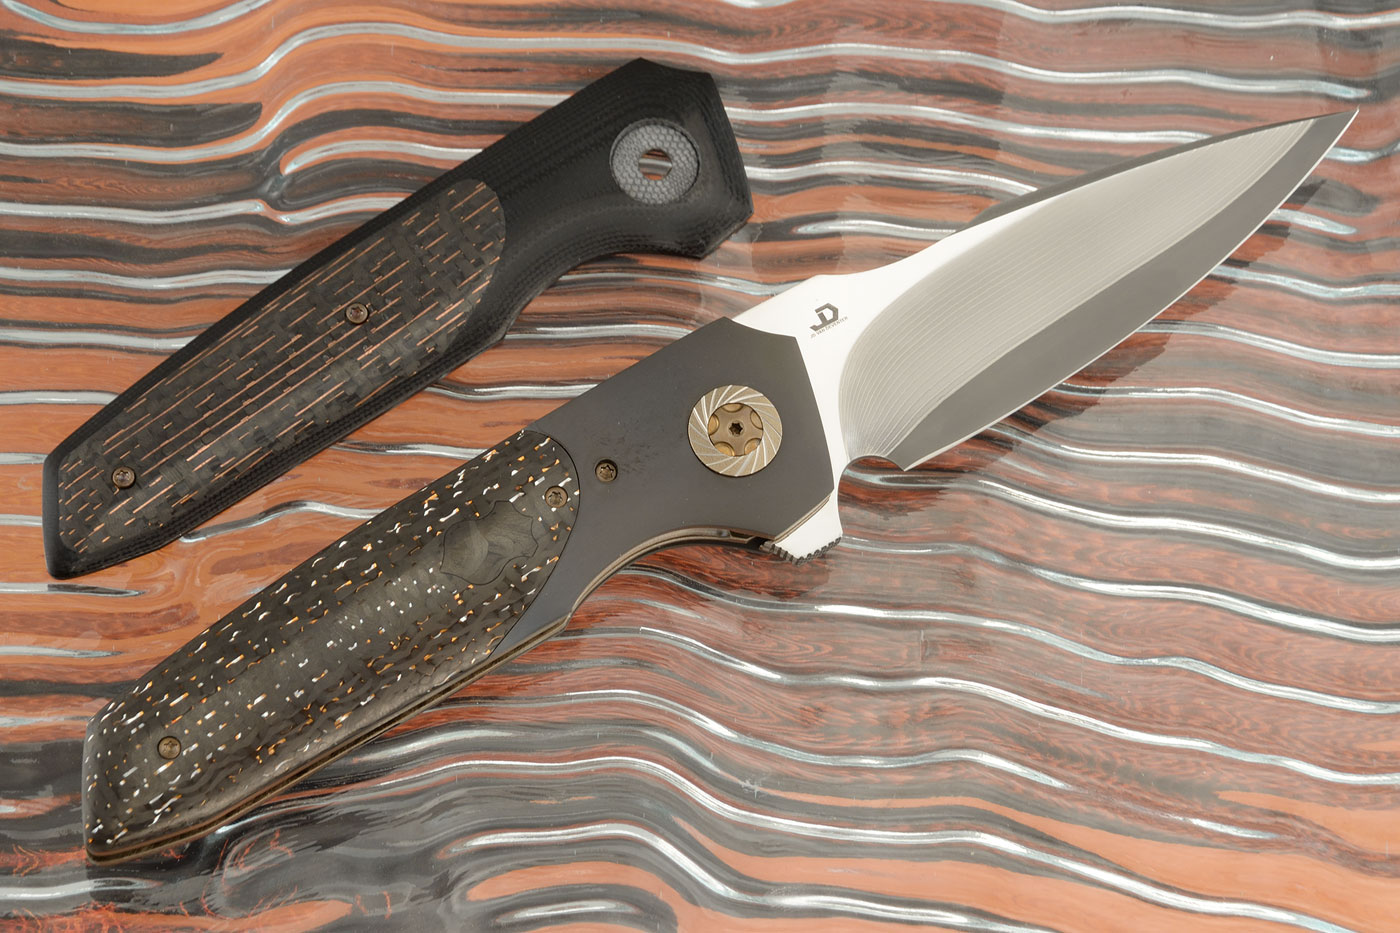 Silver Flipper Premium - LEFT HANDED (Two sets of Scales!) - SG2 San Mai Stainless Damascus